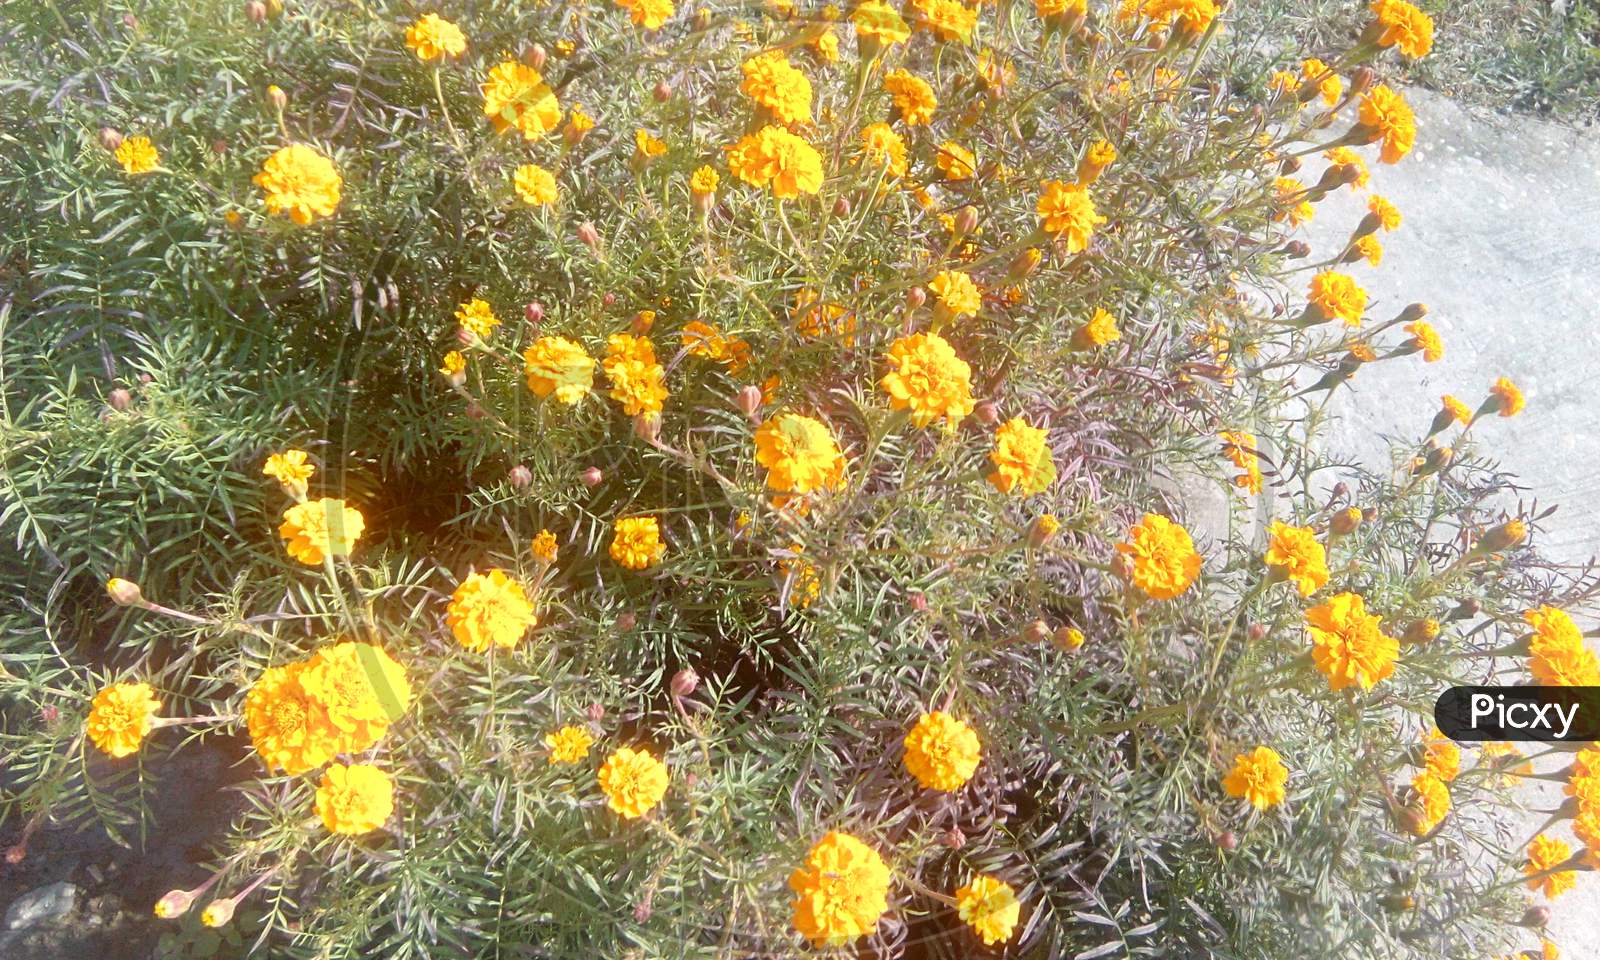 Yellow Marie Gold Flowers blooming on Plants